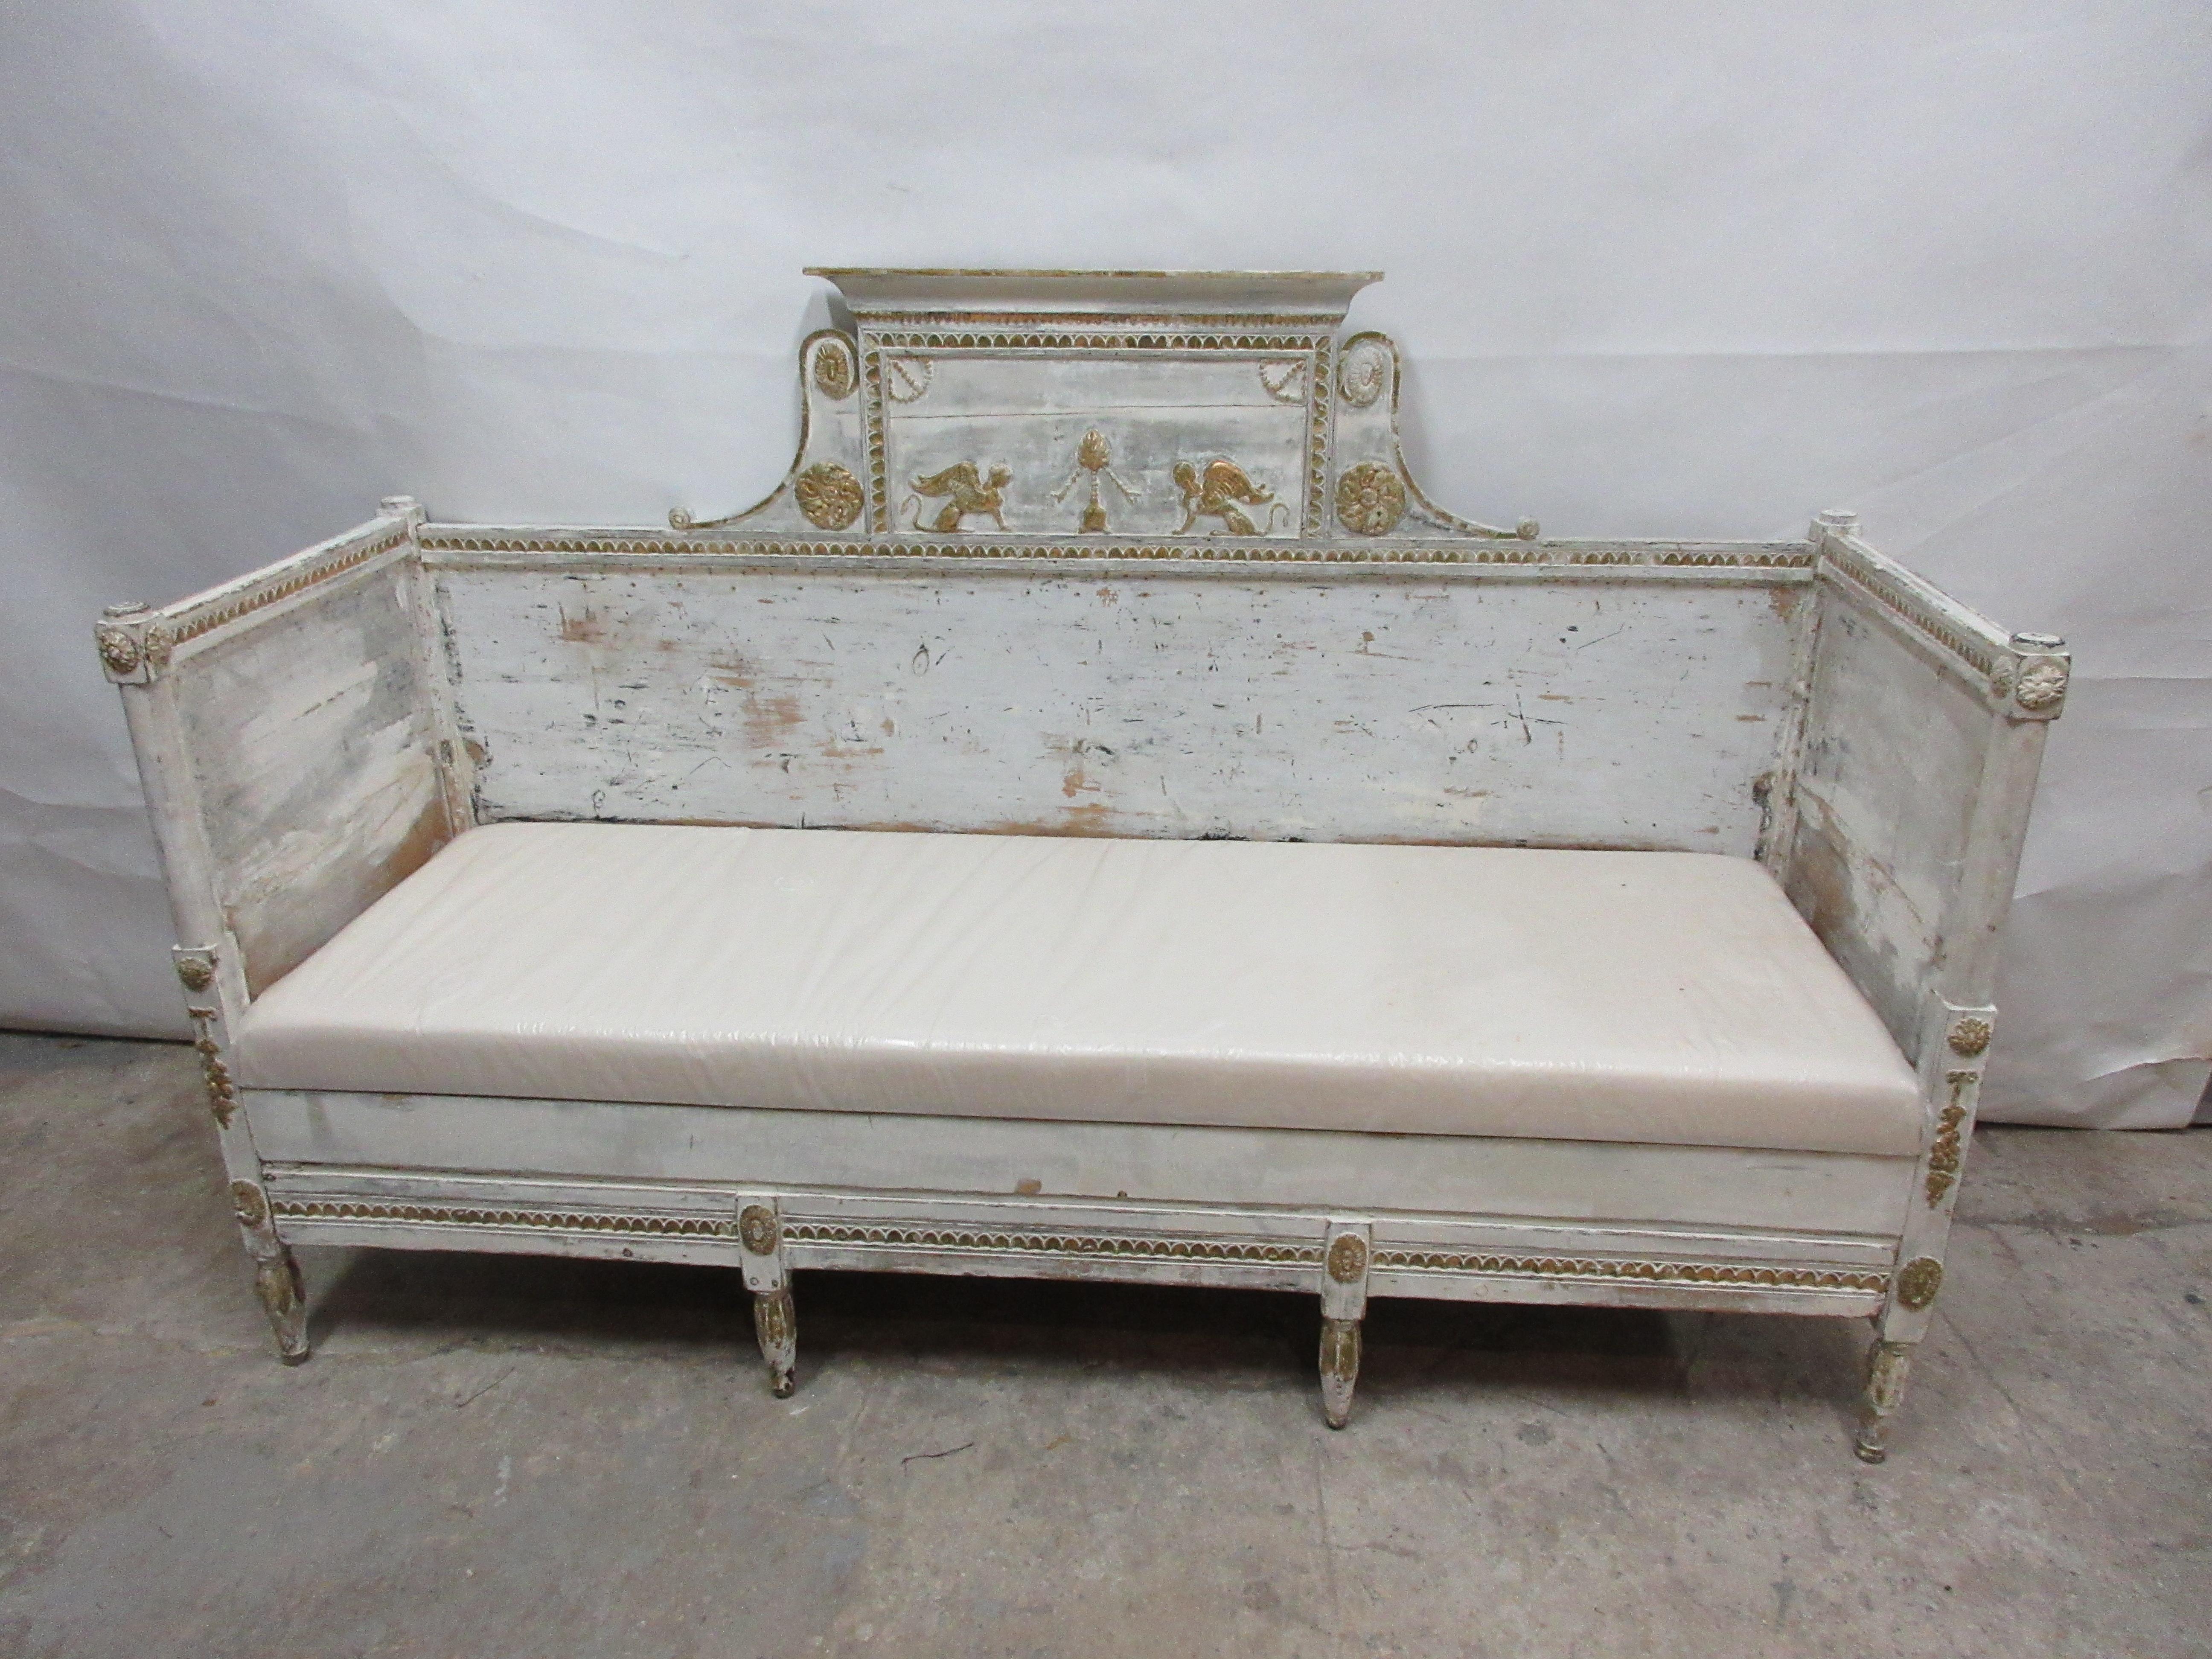 This is a 100% original painted Swedish Gustavian sofa. It has new cushion seating covered in Muslin. This sofa was found at an Auction in Stockholm, Sweden.